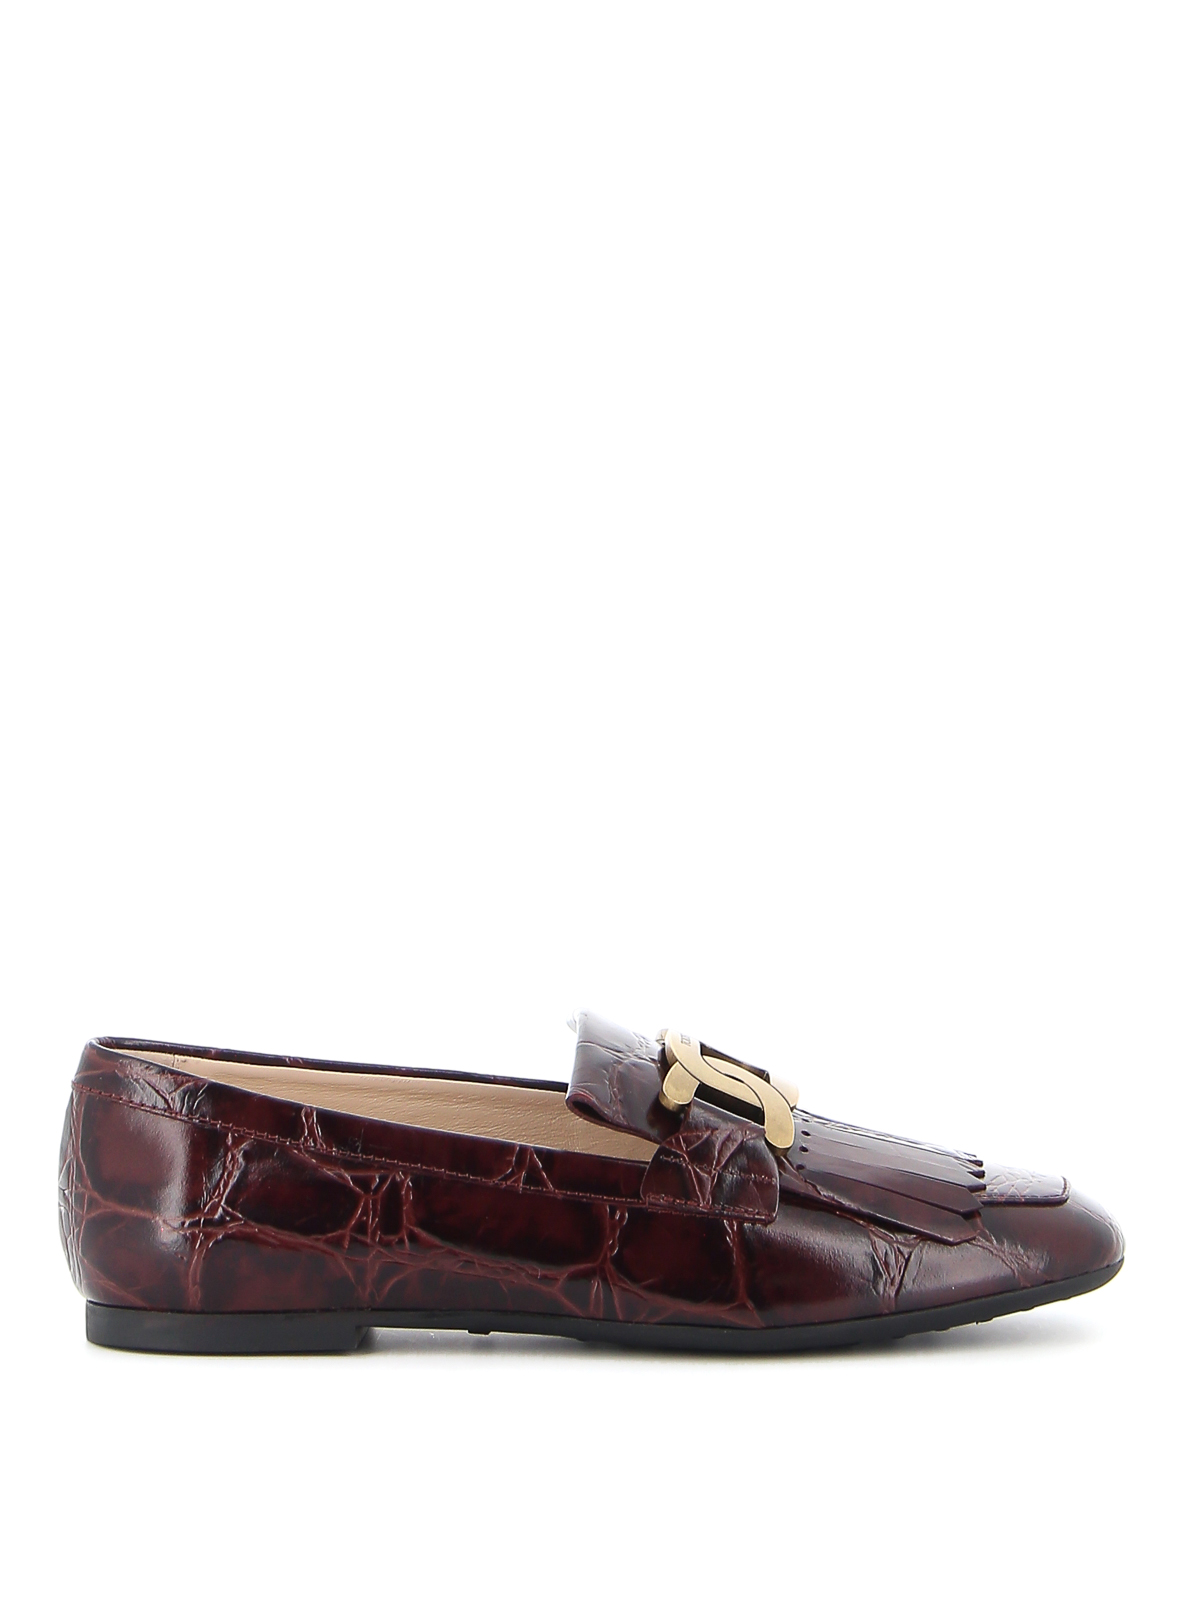 TOD'S FRINGED CROCO PRINT LOAFERS